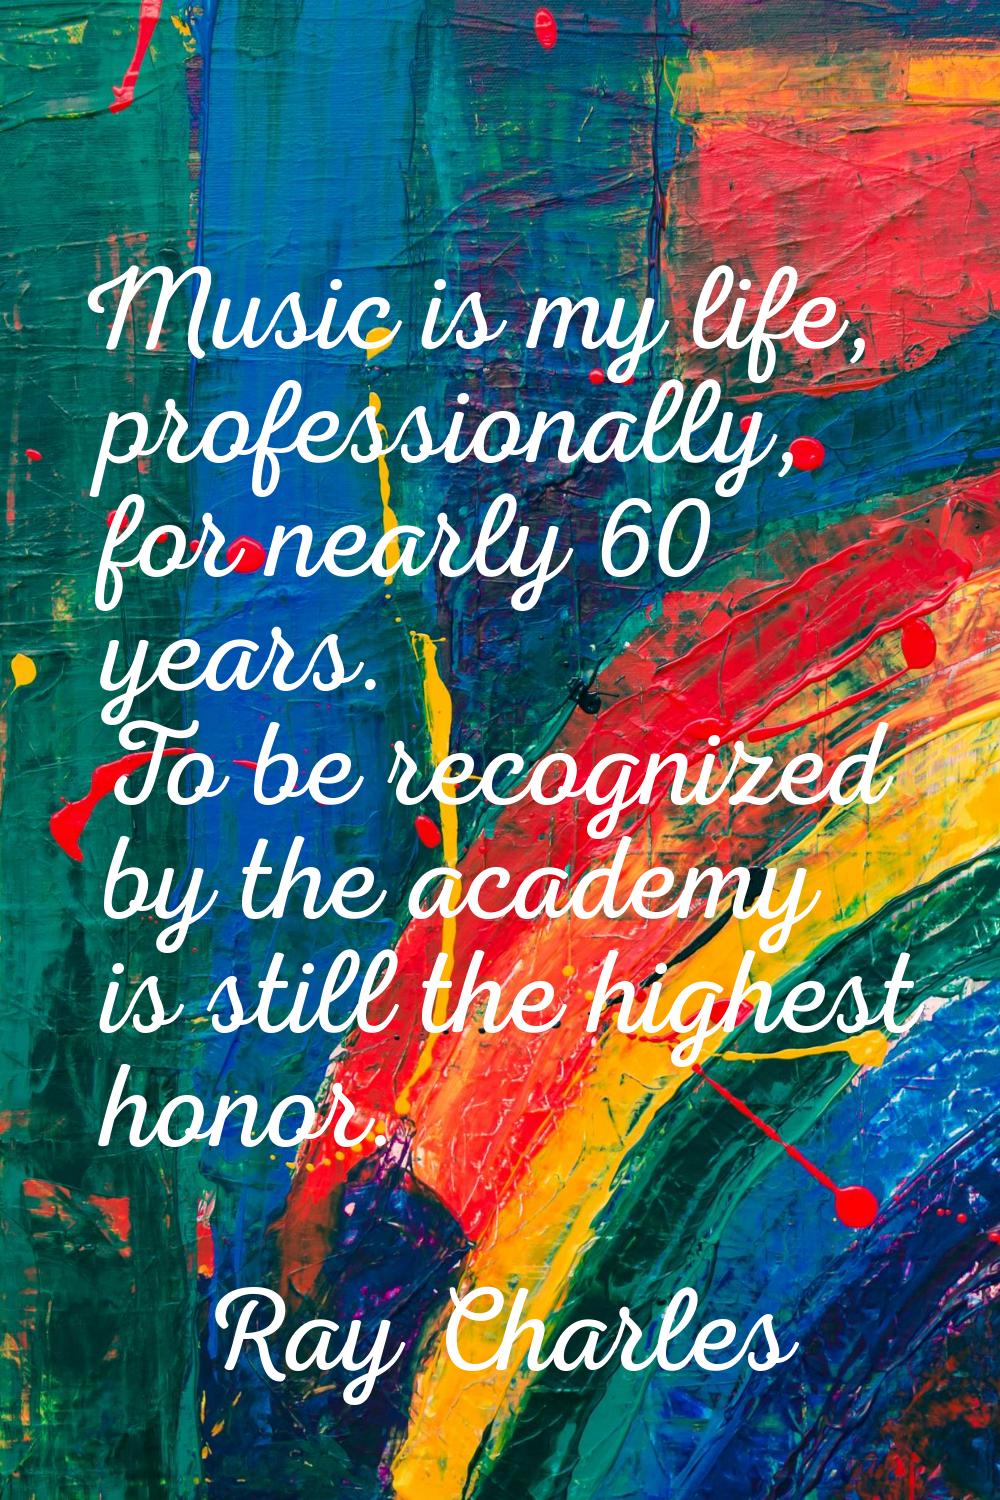 Music is my life, professionally, for nearly 60 years. To be recognized by the academy is still the